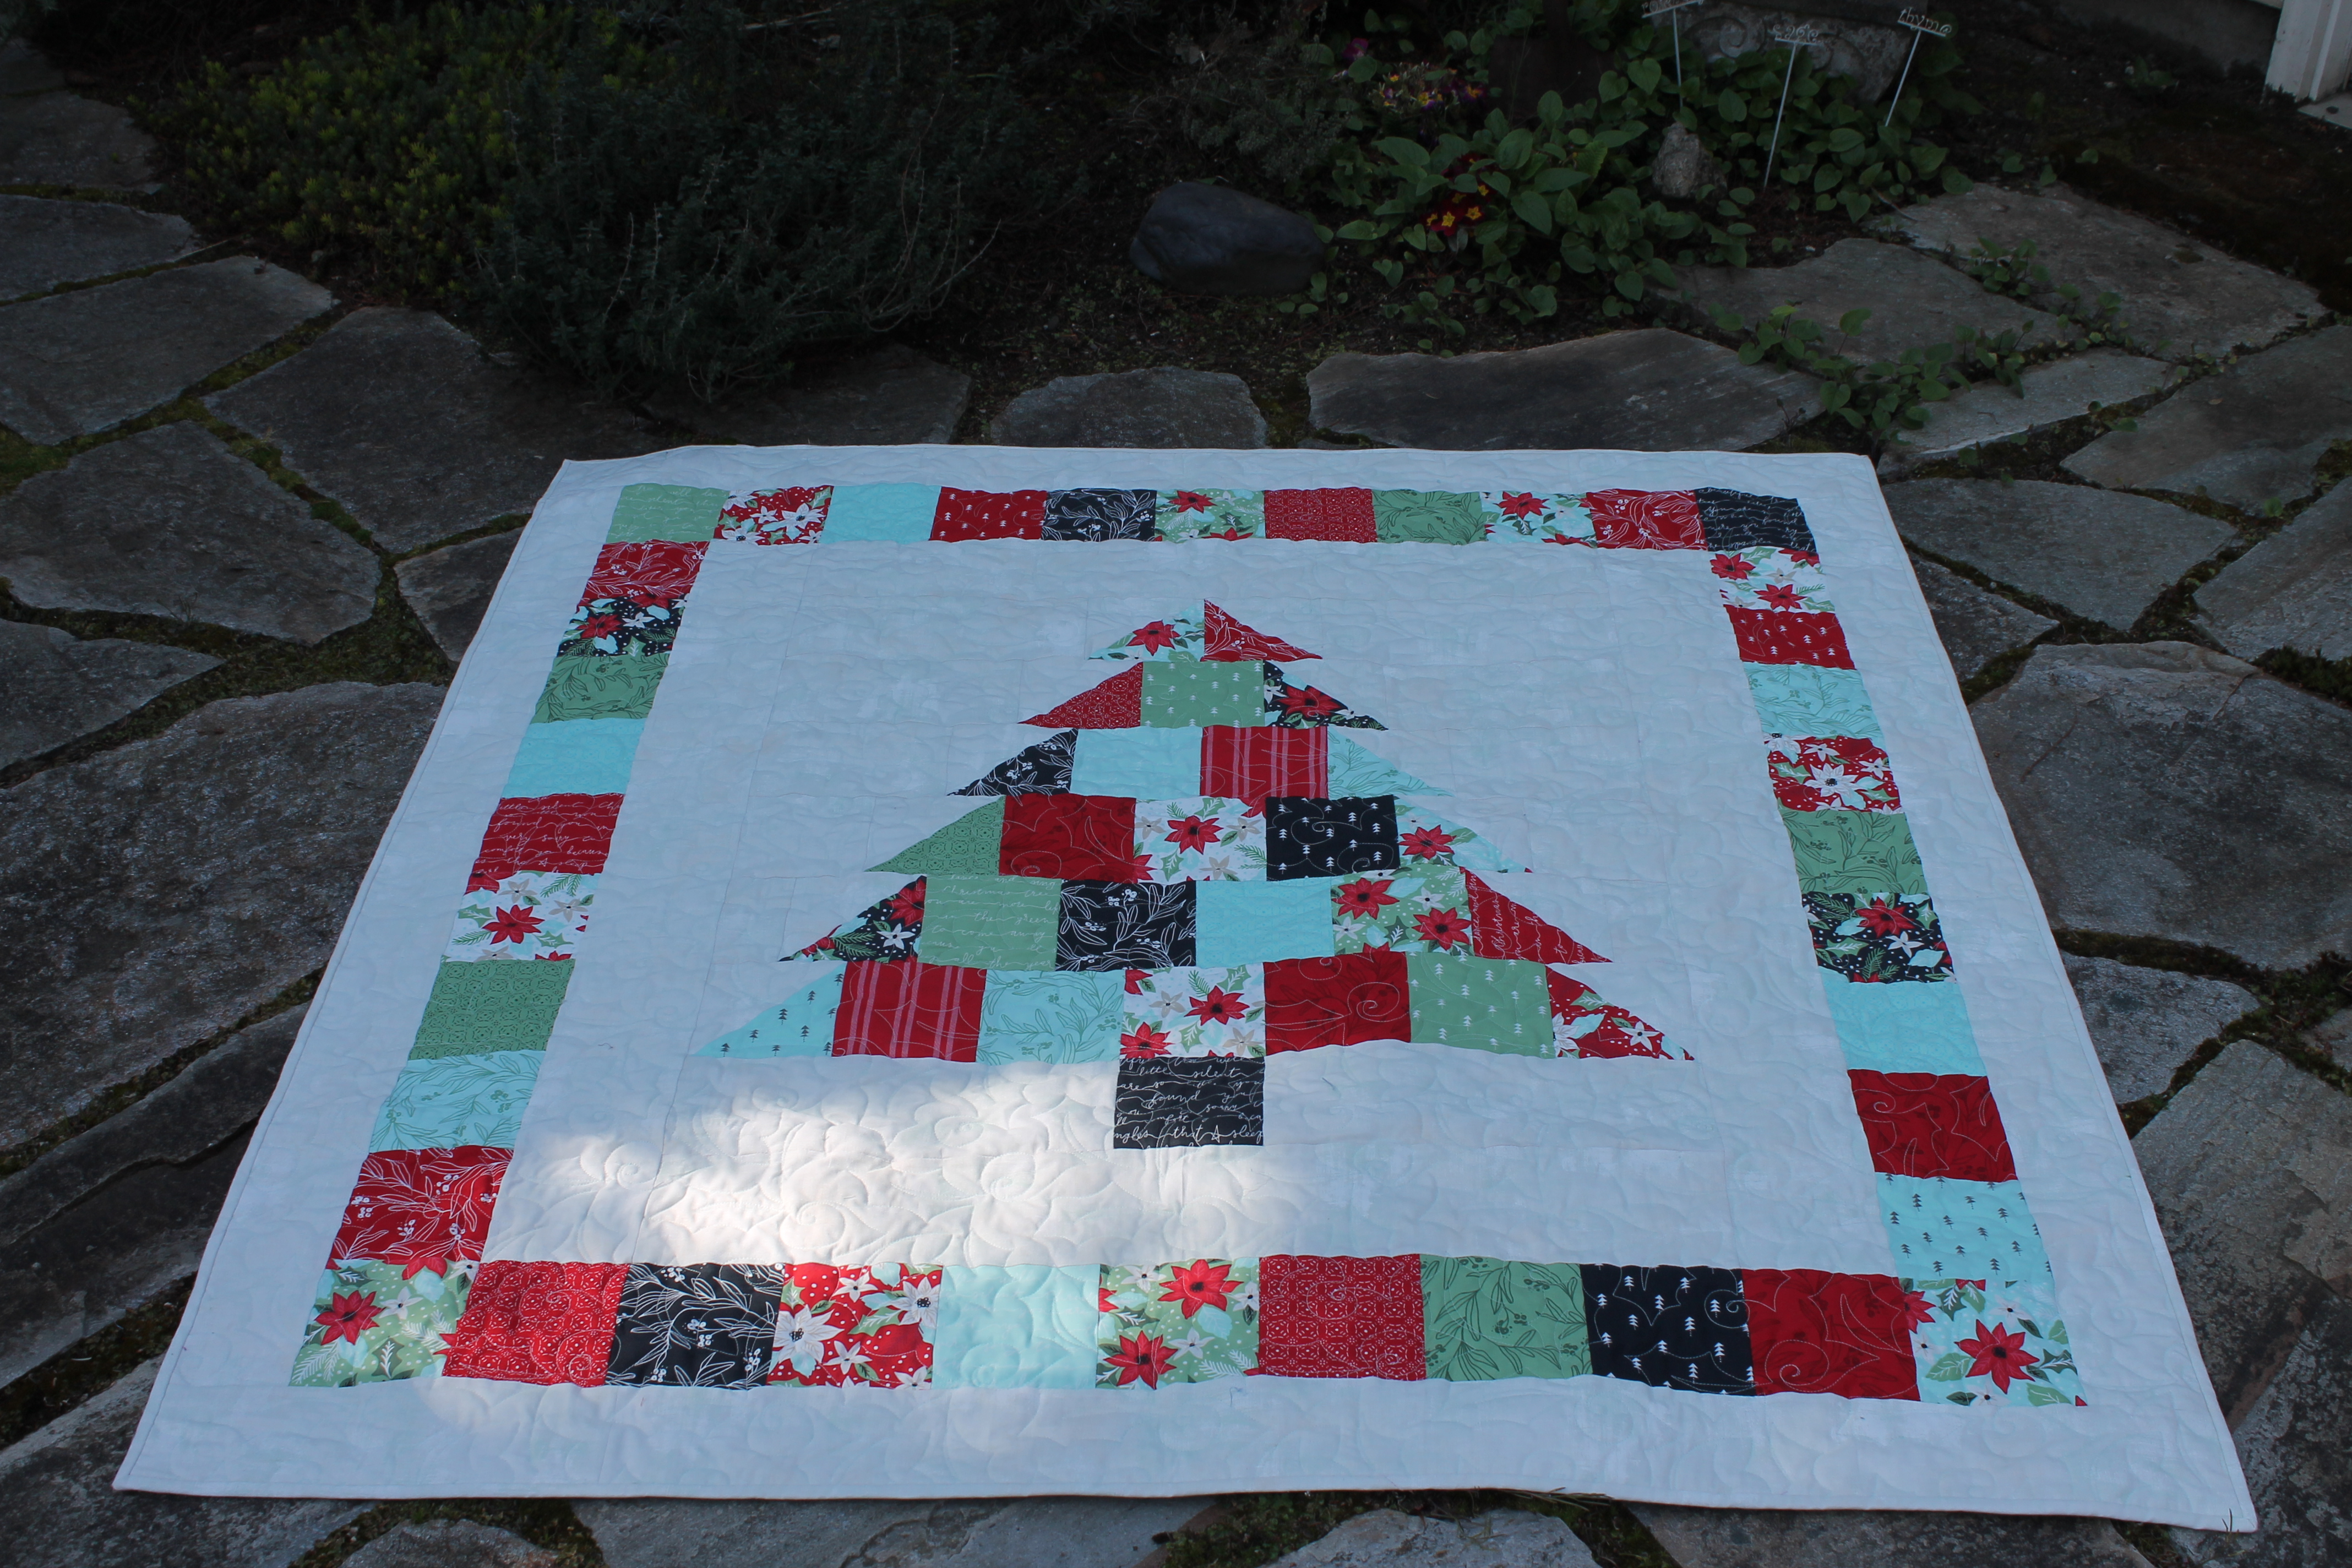 Shortcut Quilt: Charming Christmas - FREE Charm Pack Pattern - The